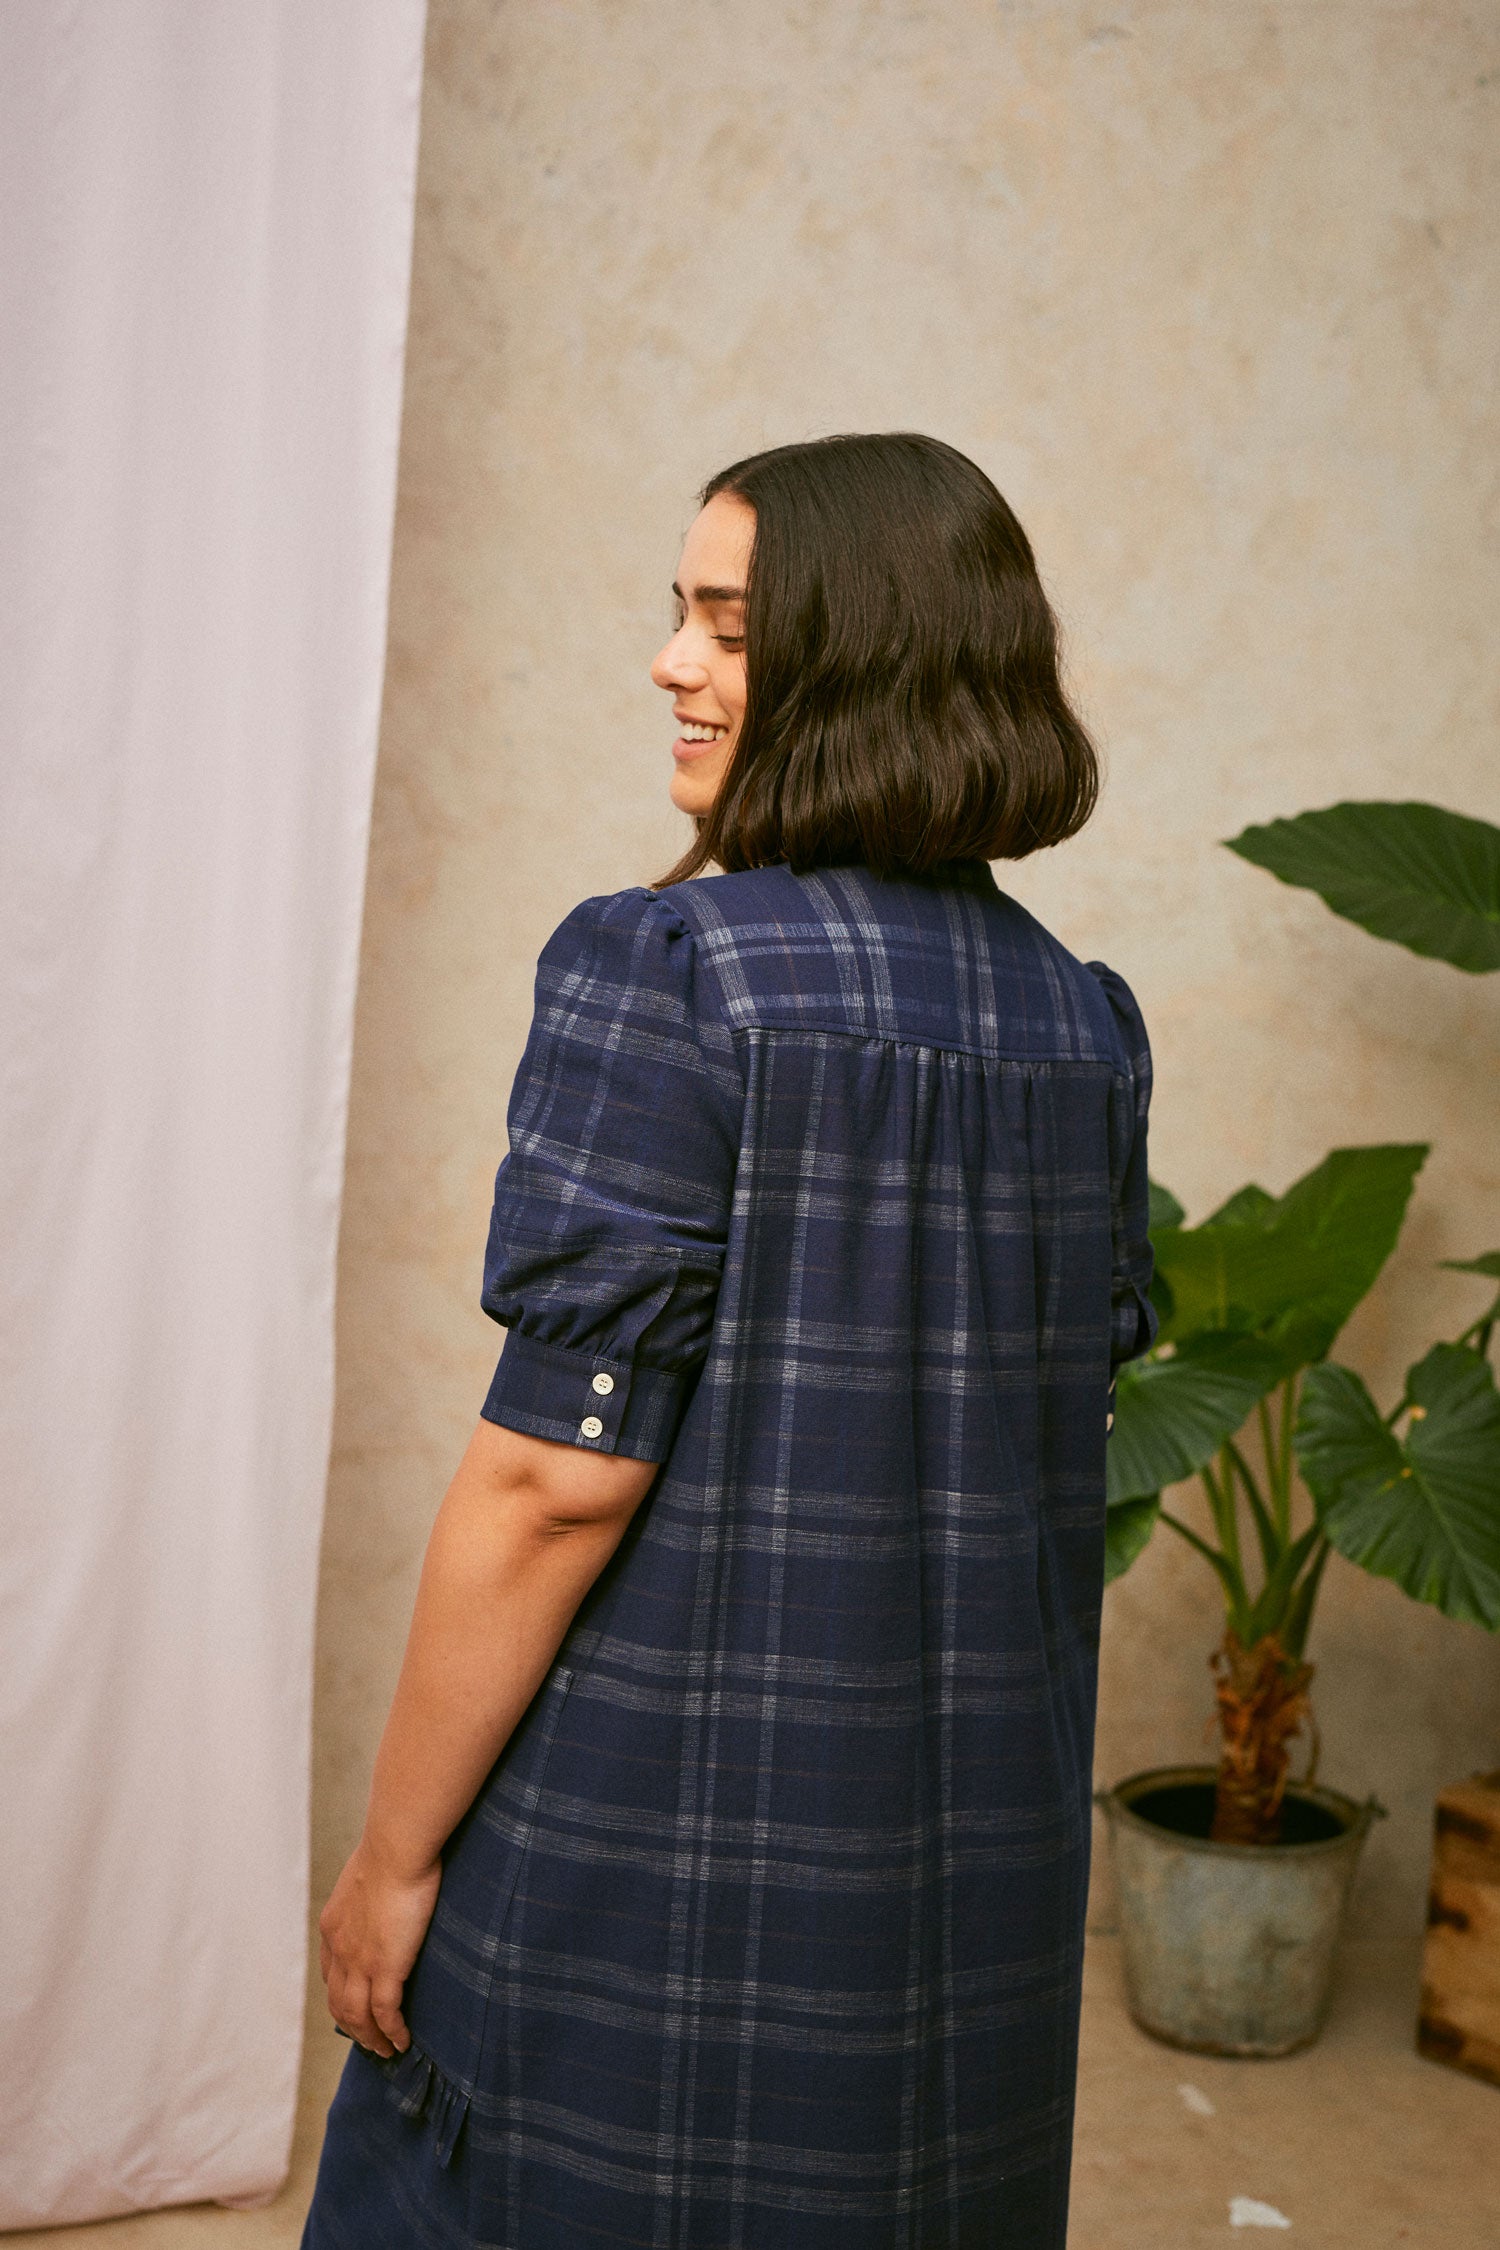 Cropped back view shot of model wearing Saywood's Rosa puff sleeve shirtdress in navy check cotton; gathers can be seen on the back of the dress from the yoke seam. A plant and drop of pink fabric can be seen in the background.